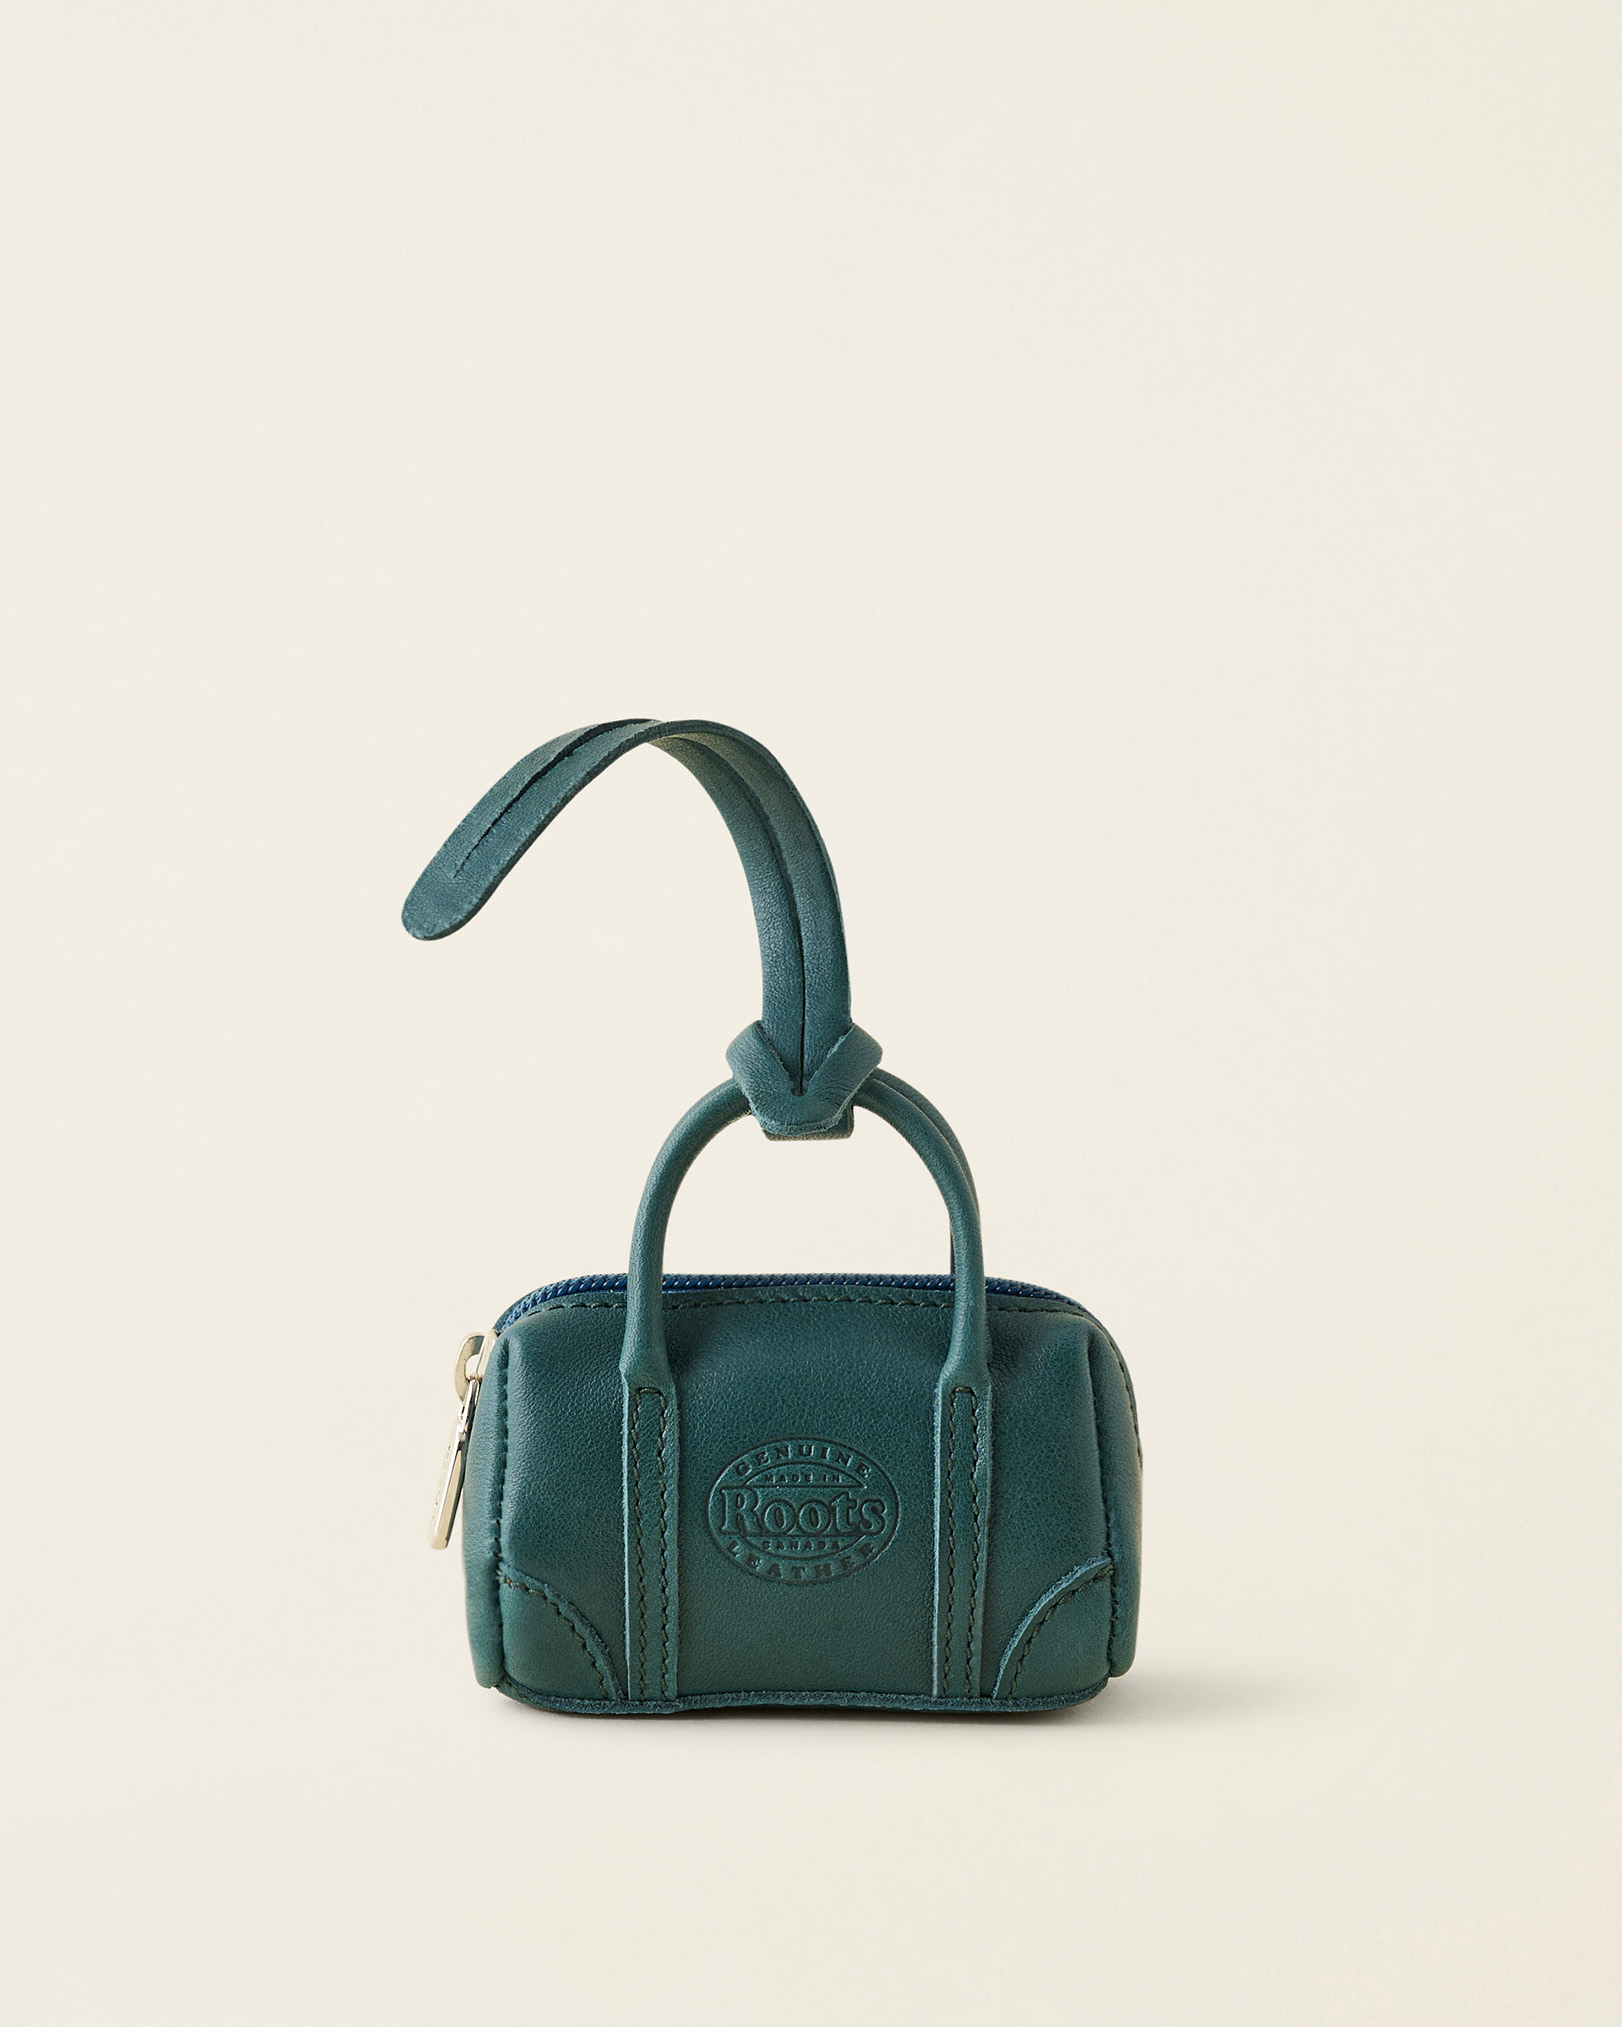 Roots Upcycle Banff Bag Charm in Deep Teal